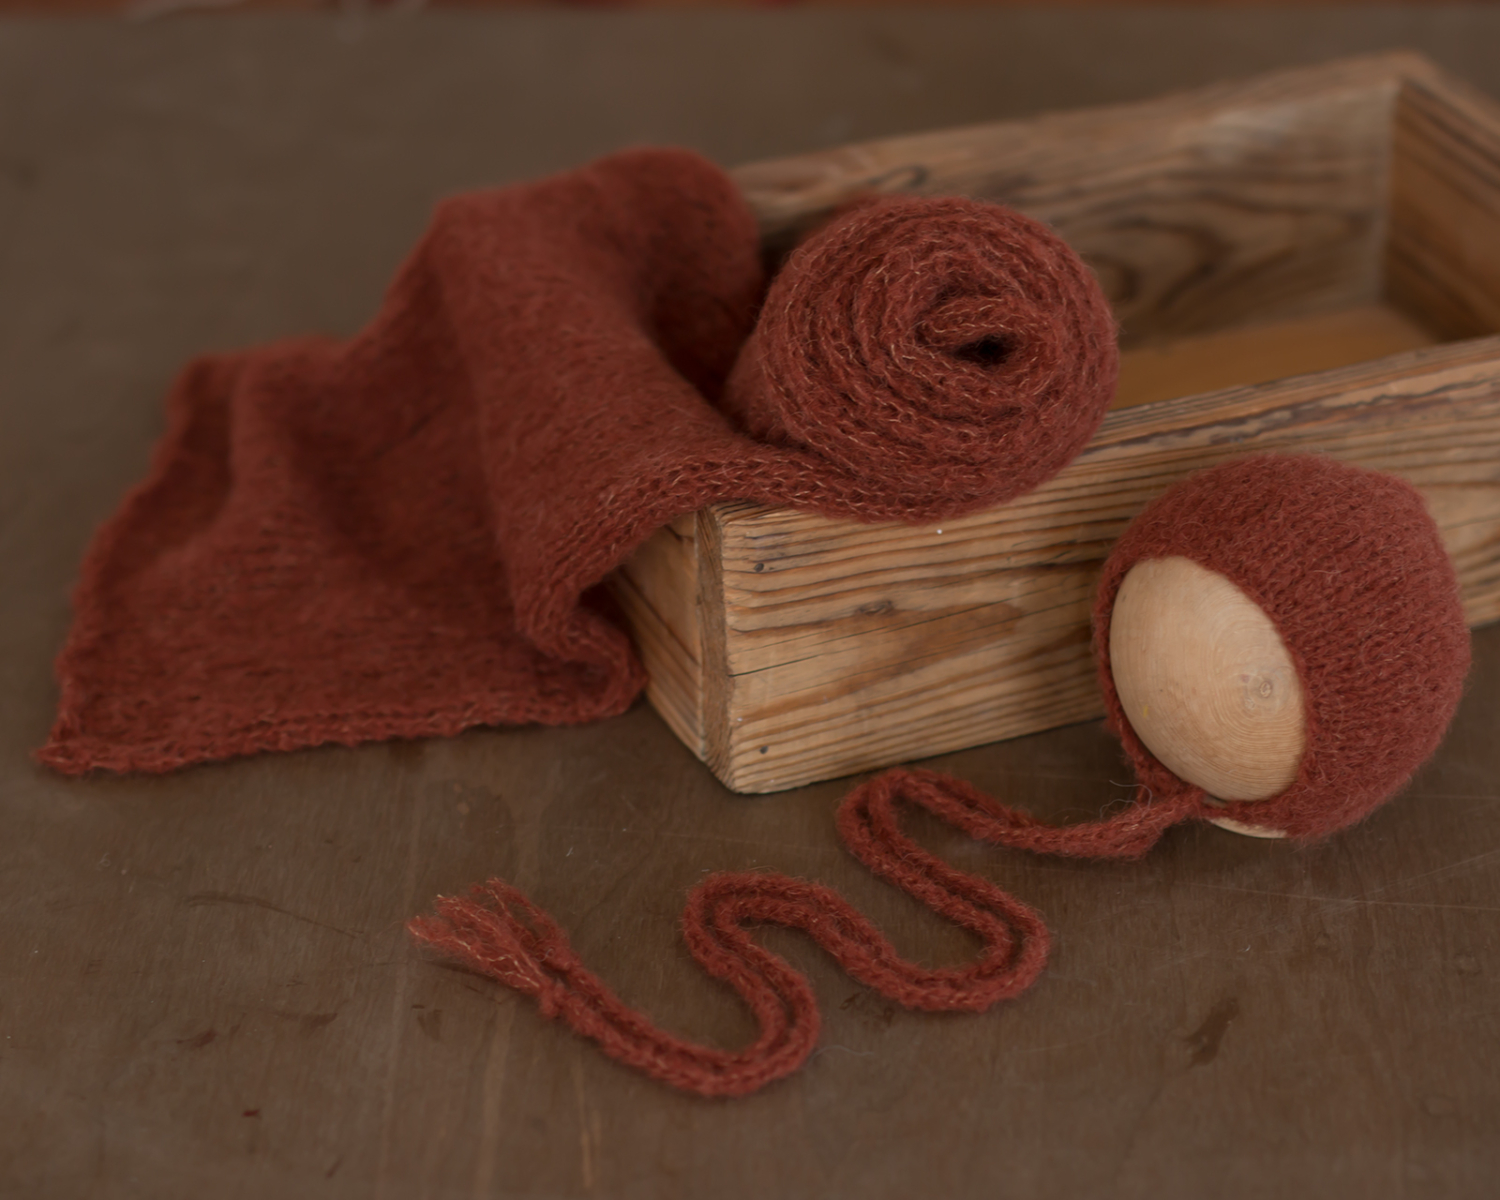 PRE-ORDER Rust mohair knitted Wrap 150cm (59 in) or set with the matching newborn Bonnet